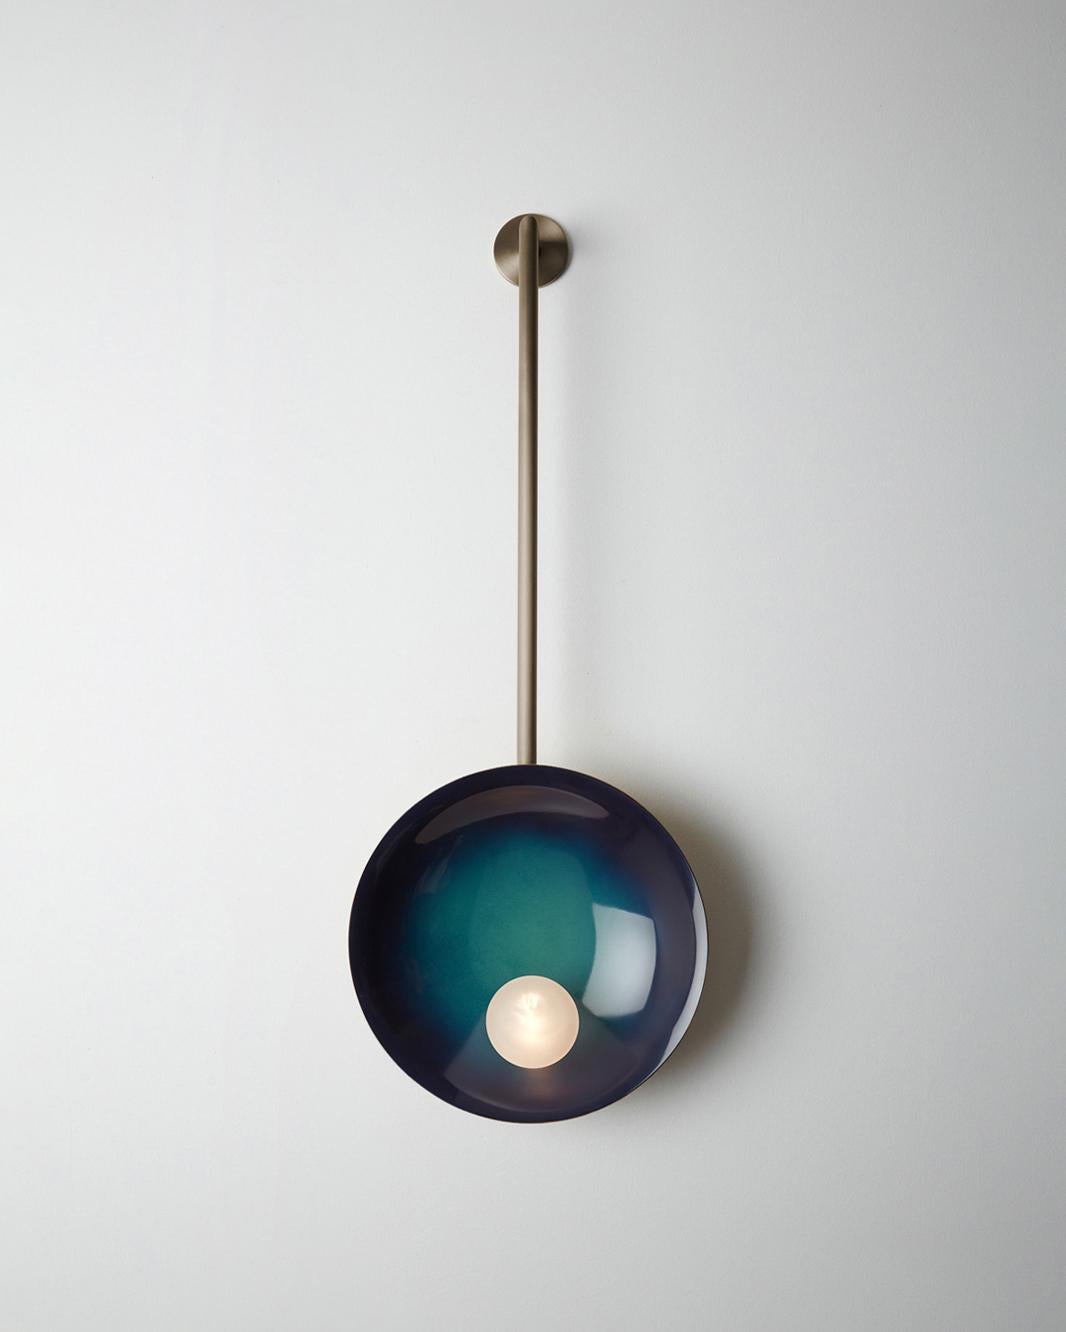 Oyster Midnight Blue and Brushed Bronze Wall Mounted Lamp With Rod by Carla Baz
Dimensions: D 9 x W 30 x H 78 cm.
Materials: Brushed bronze.
Weight: 2 kg.

Available in verdigris, brushed brass, stainless steel, copper or bronze finishes. Available